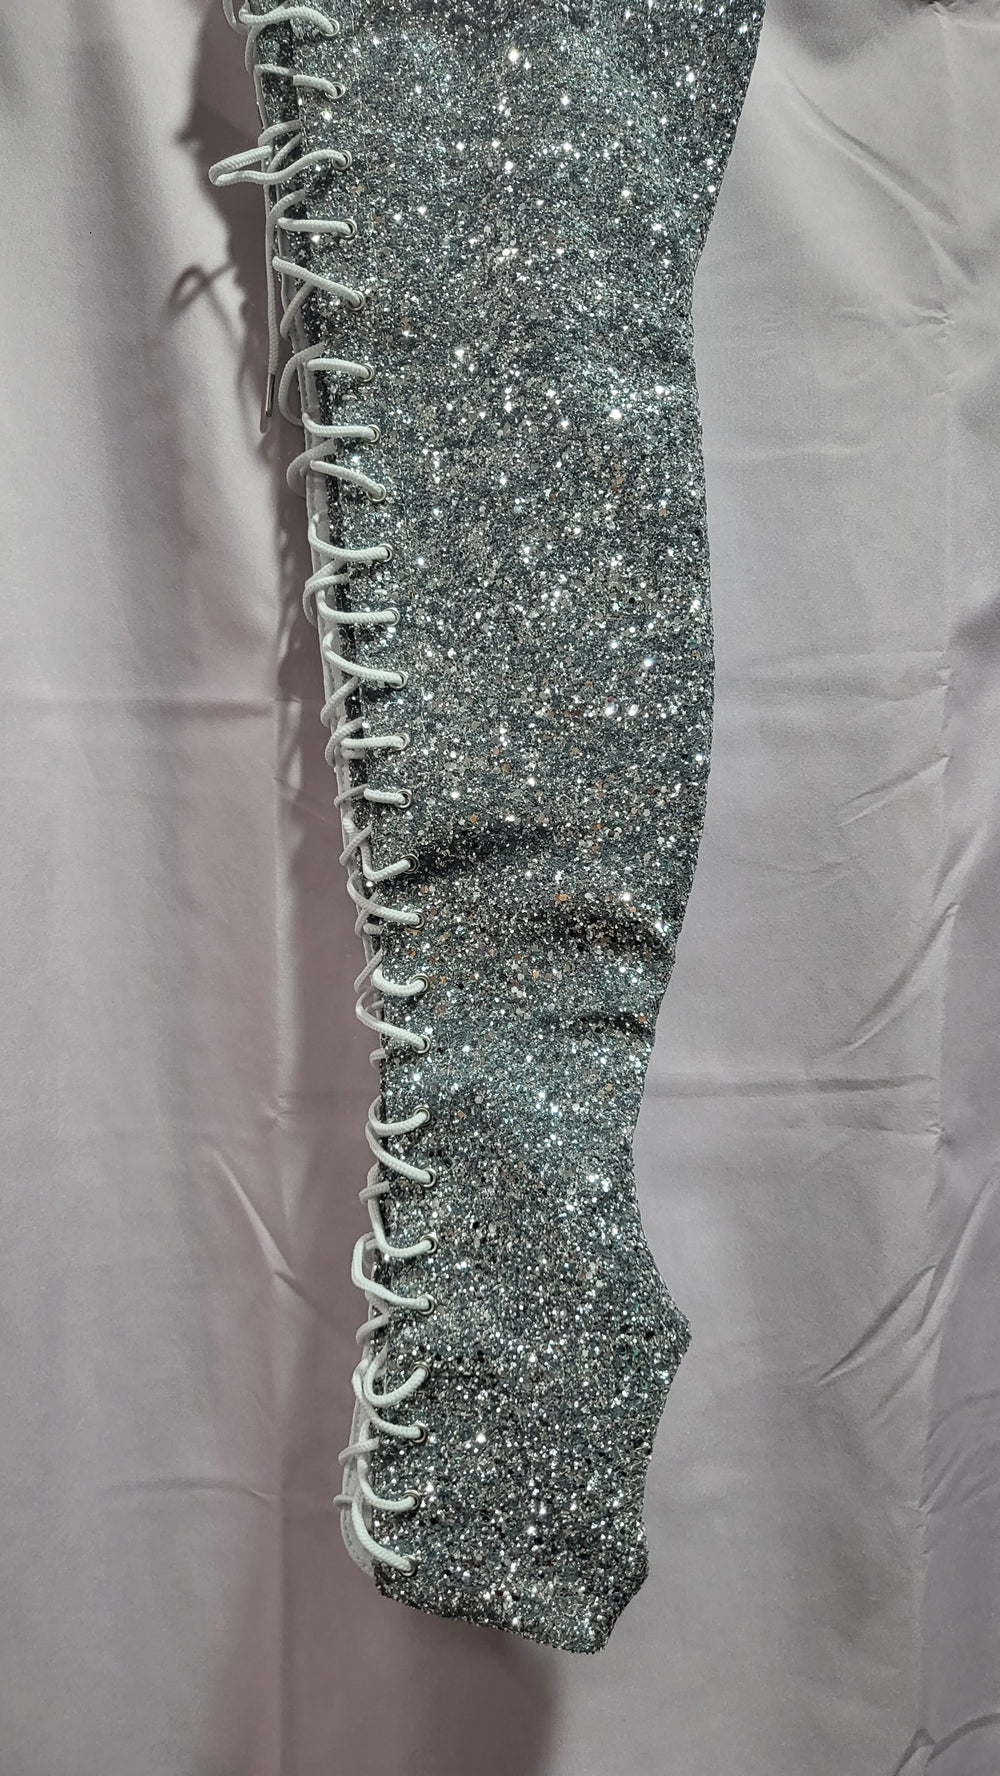 Z PLANET Thigh High Bootsleeves - Silver Glitter